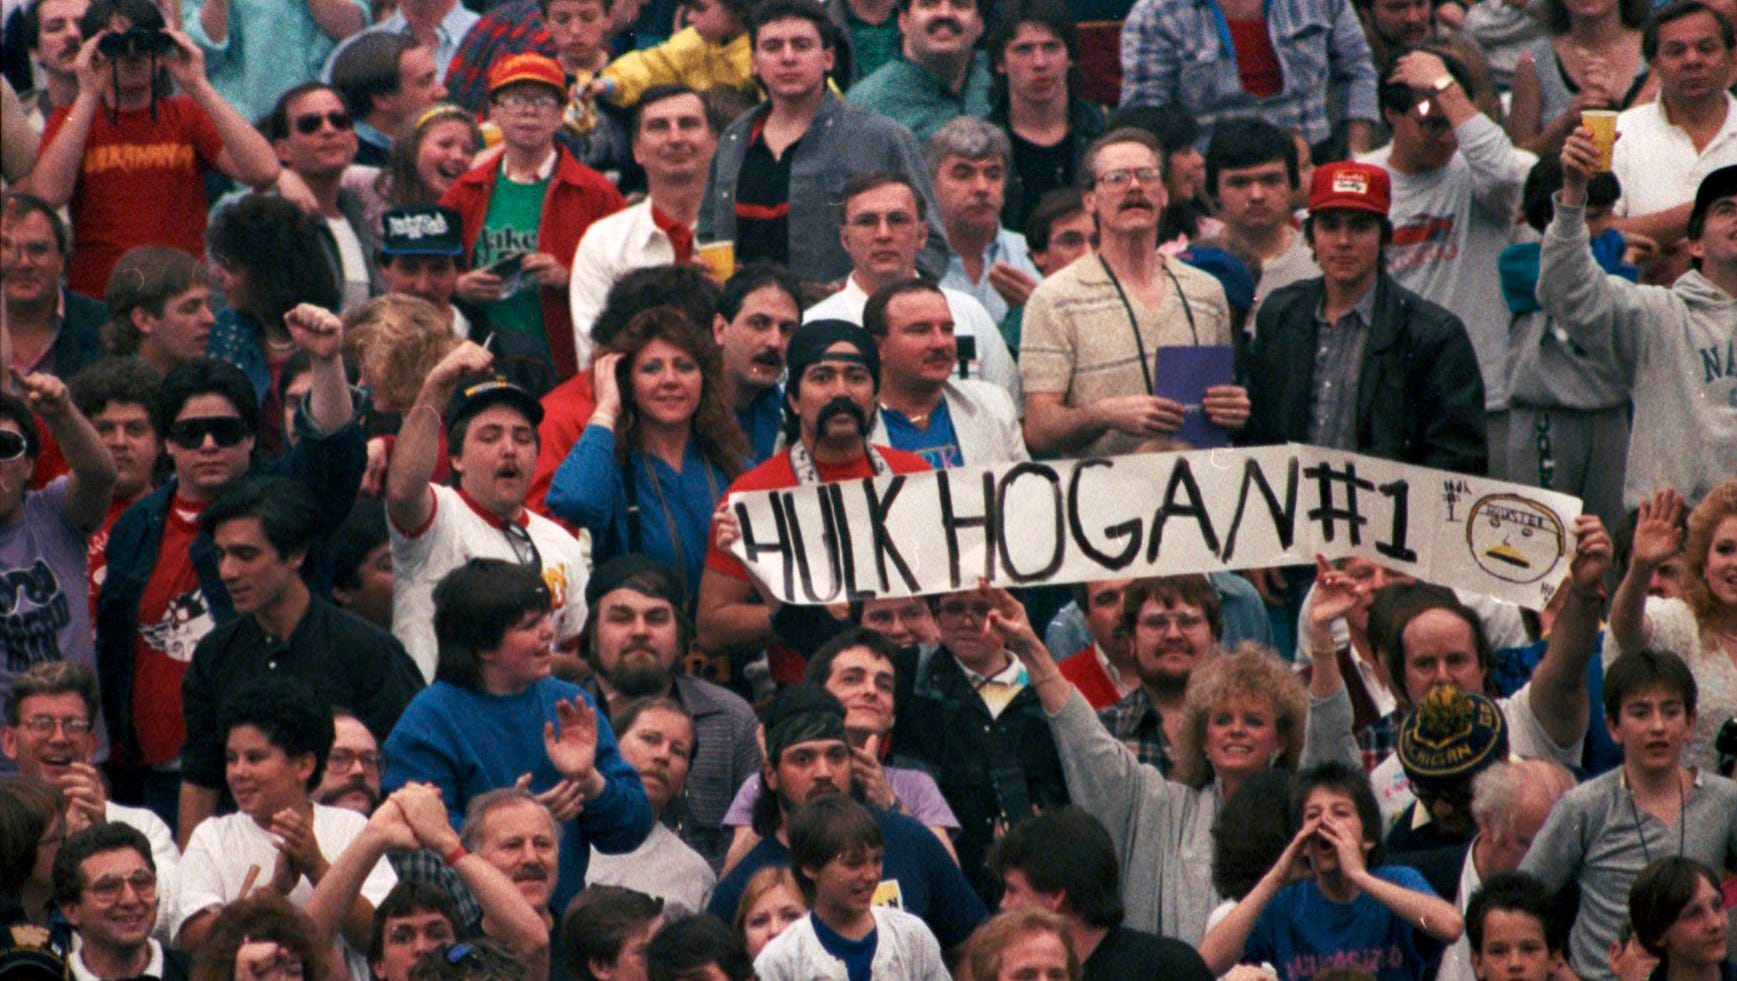 WrestleMania III took place just as "Hulkamania" was hitting its fever pitch.